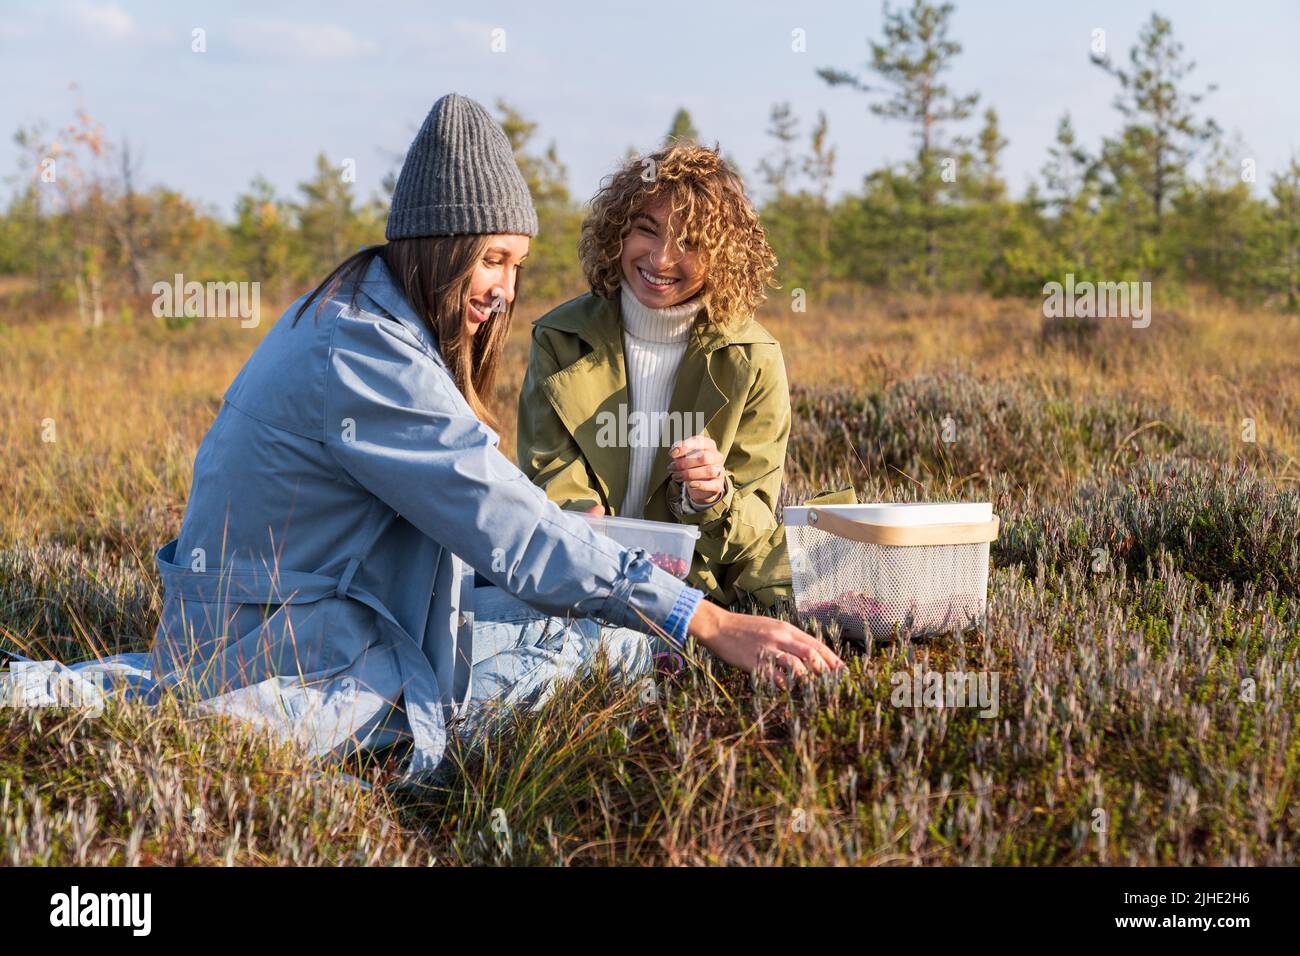 Two young cheerful girls spending weekend in countryside picking autumn berries and communicating Stock Photo